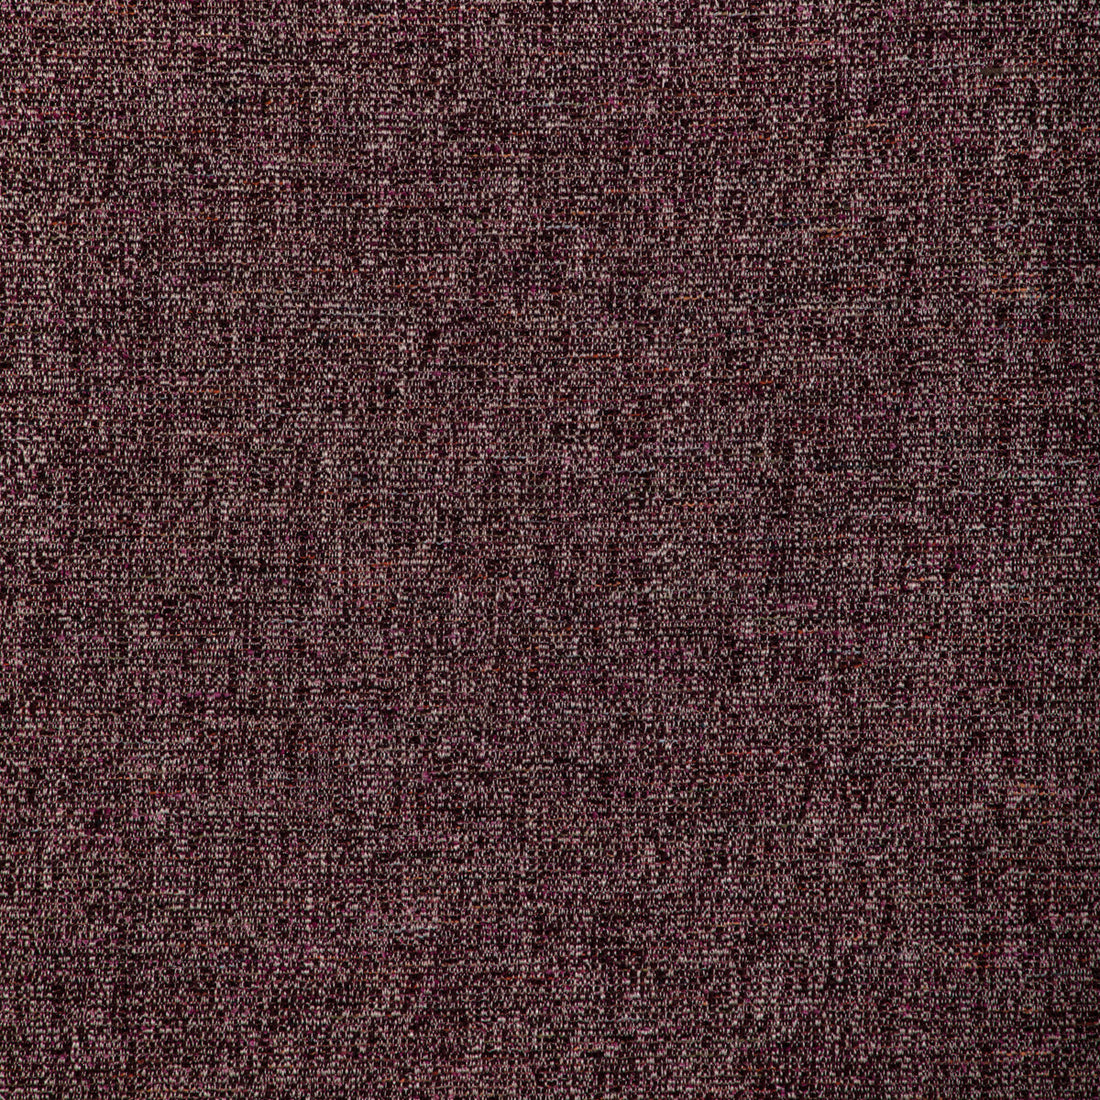 Mireille Texture fabric in aubergine color - pattern 8023128.910.0 - by Brunschwig &amp; Fils in the Arles Weaves collection